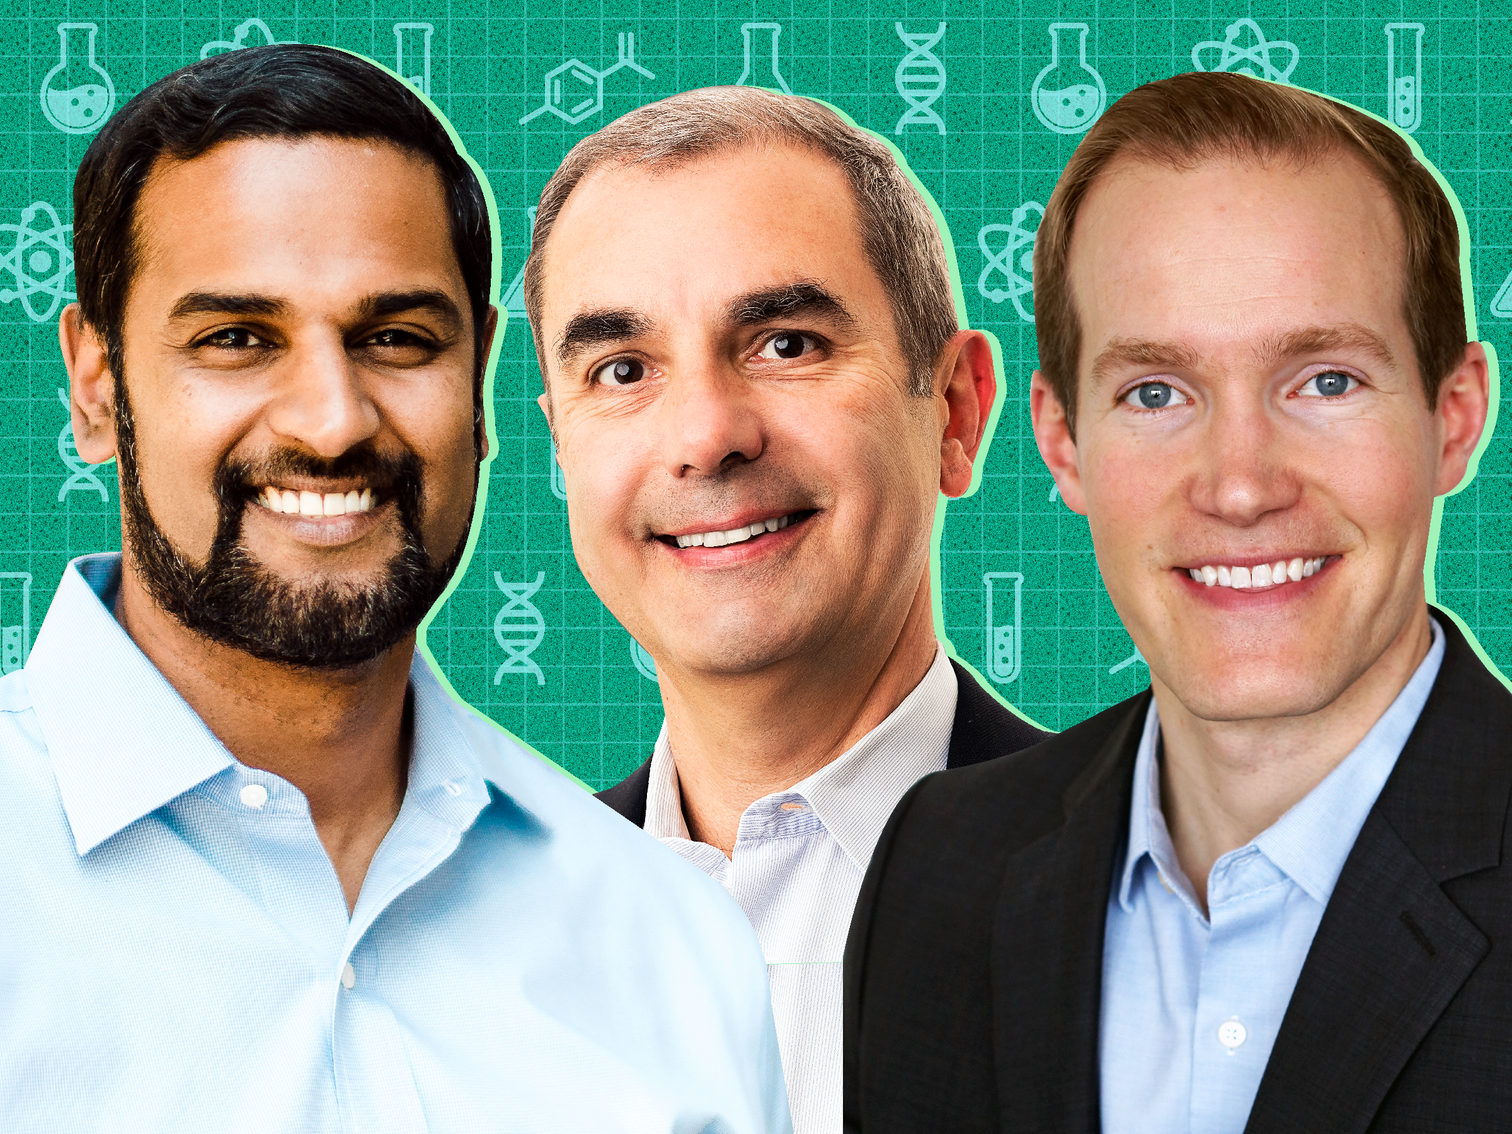 Headshots of Kiran Reddy, Nicholas Galakatos, and Brian Matesic, on a green background with science icons